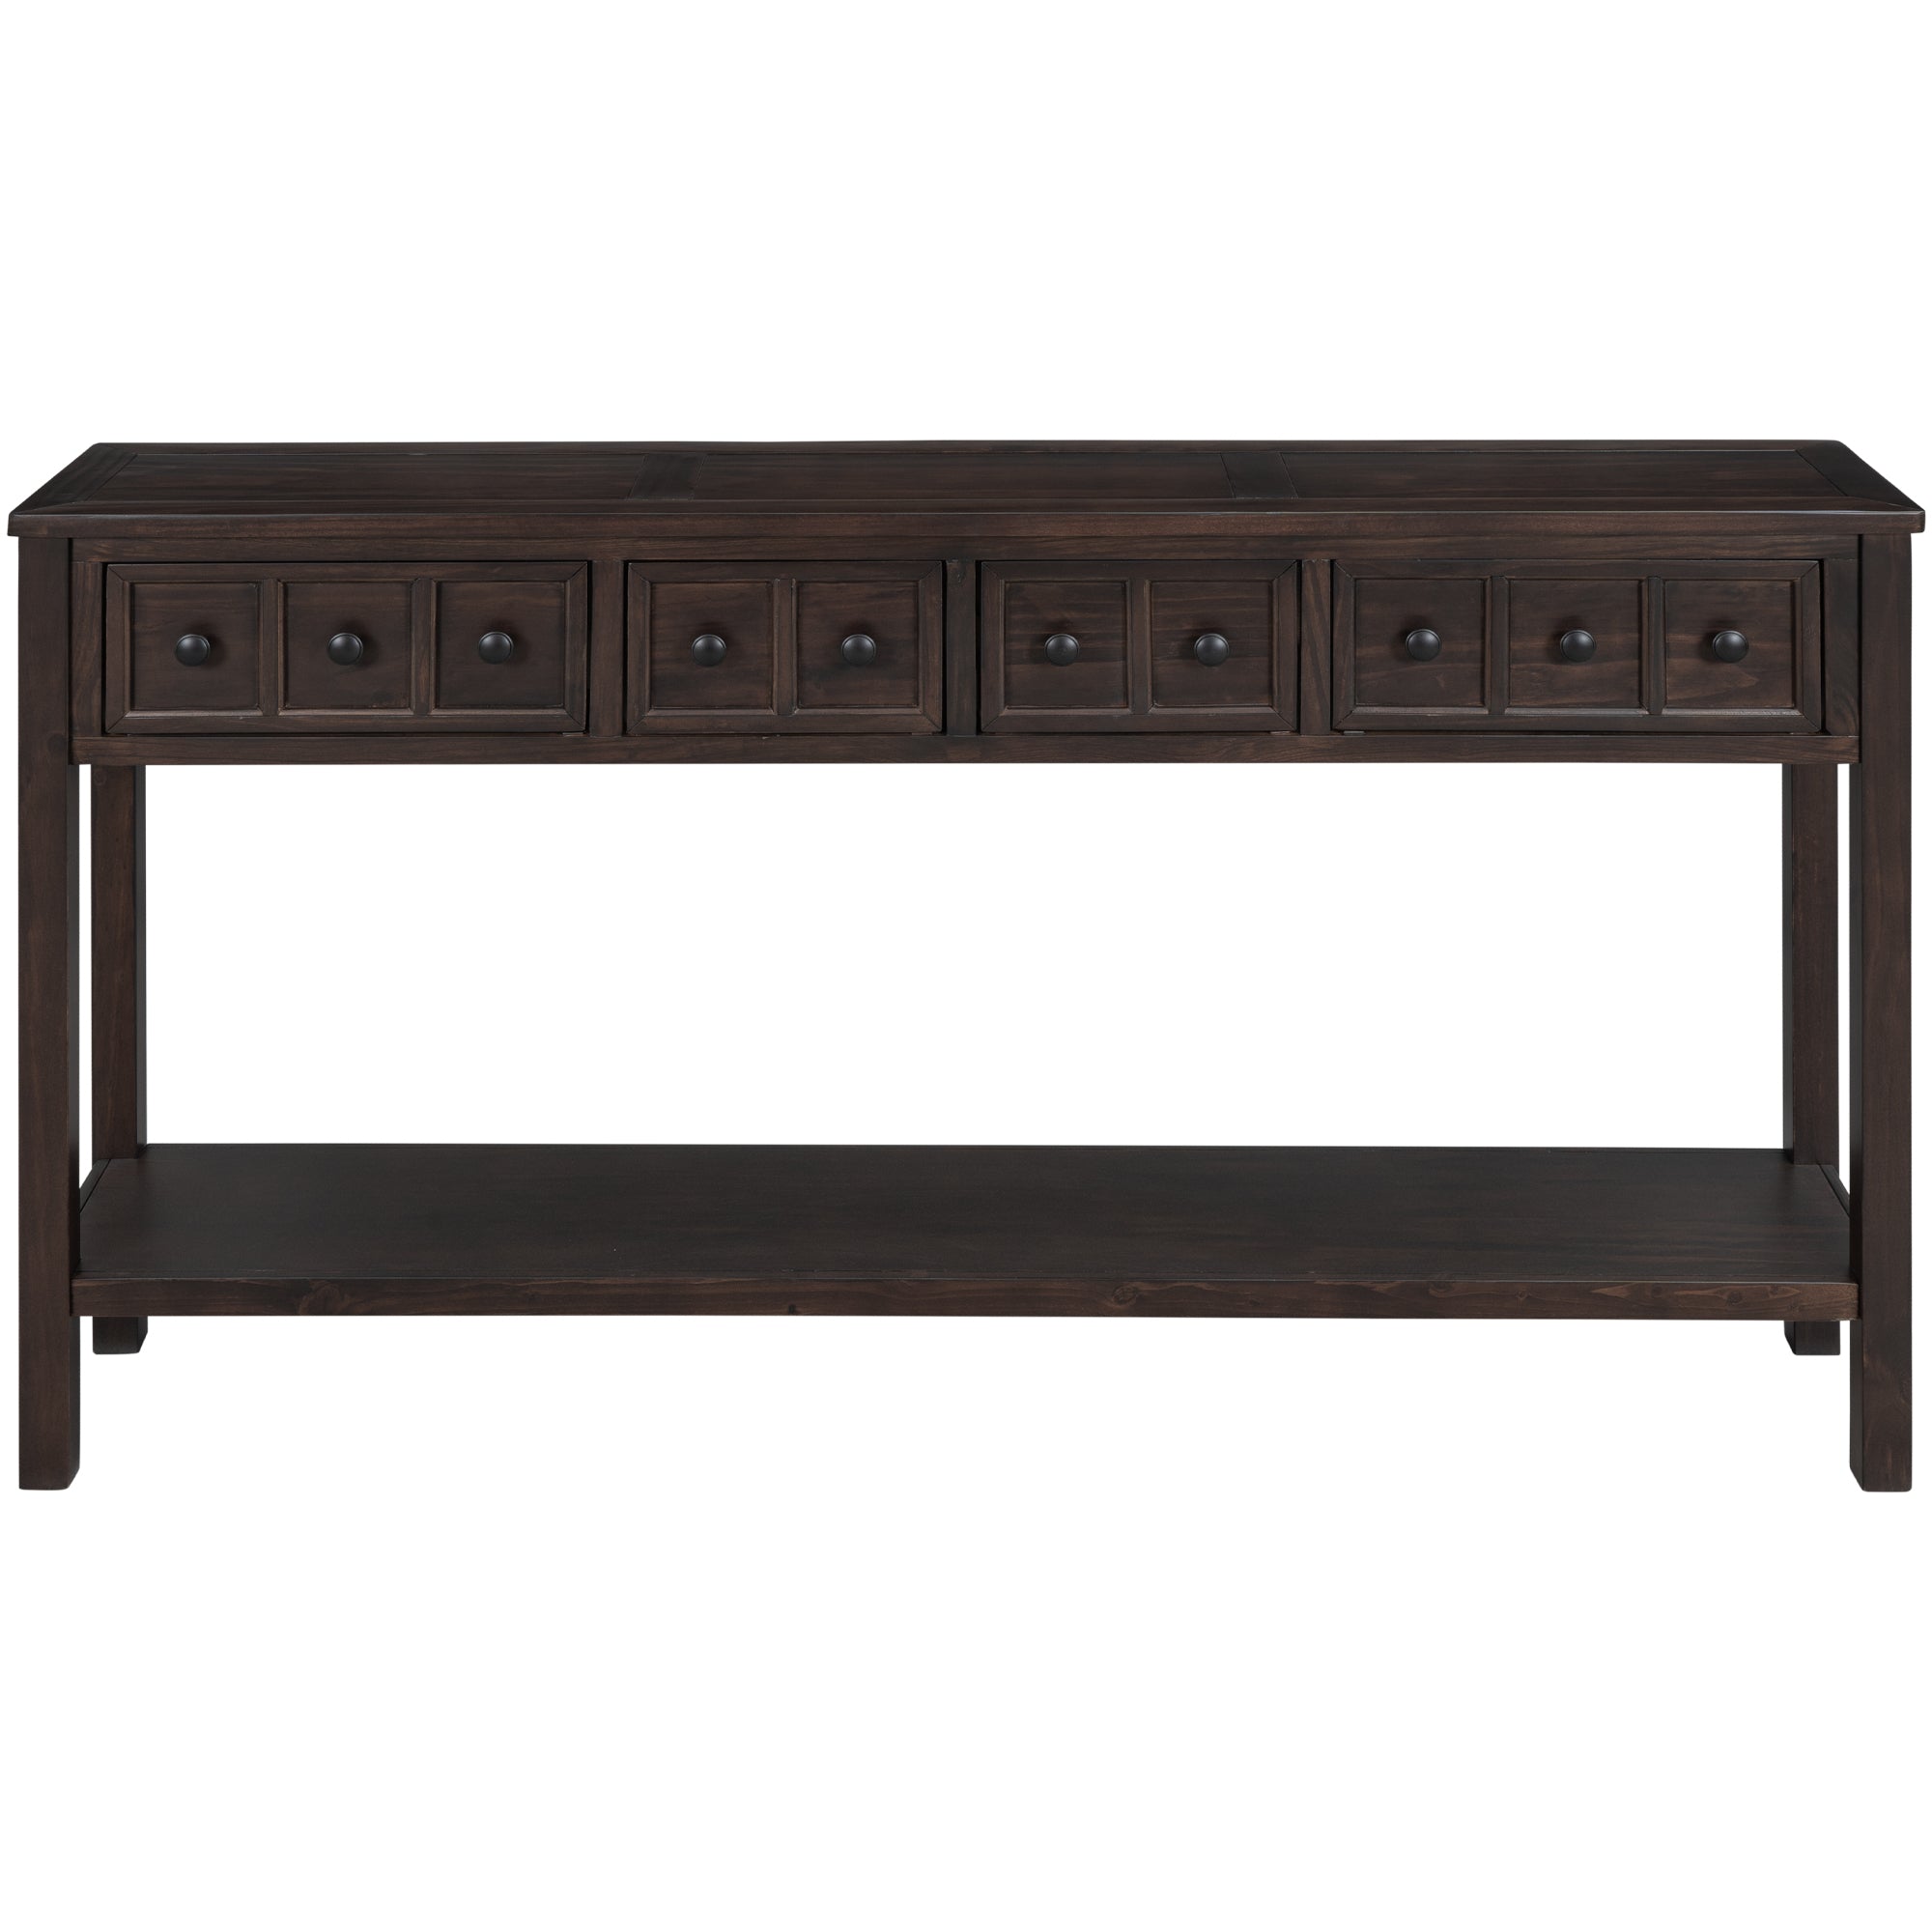 Rustic Entryway Console Table, 60" Long Sofa Table with two Different Size Drawers and Bottom Shelf for Storage-Boyel Living